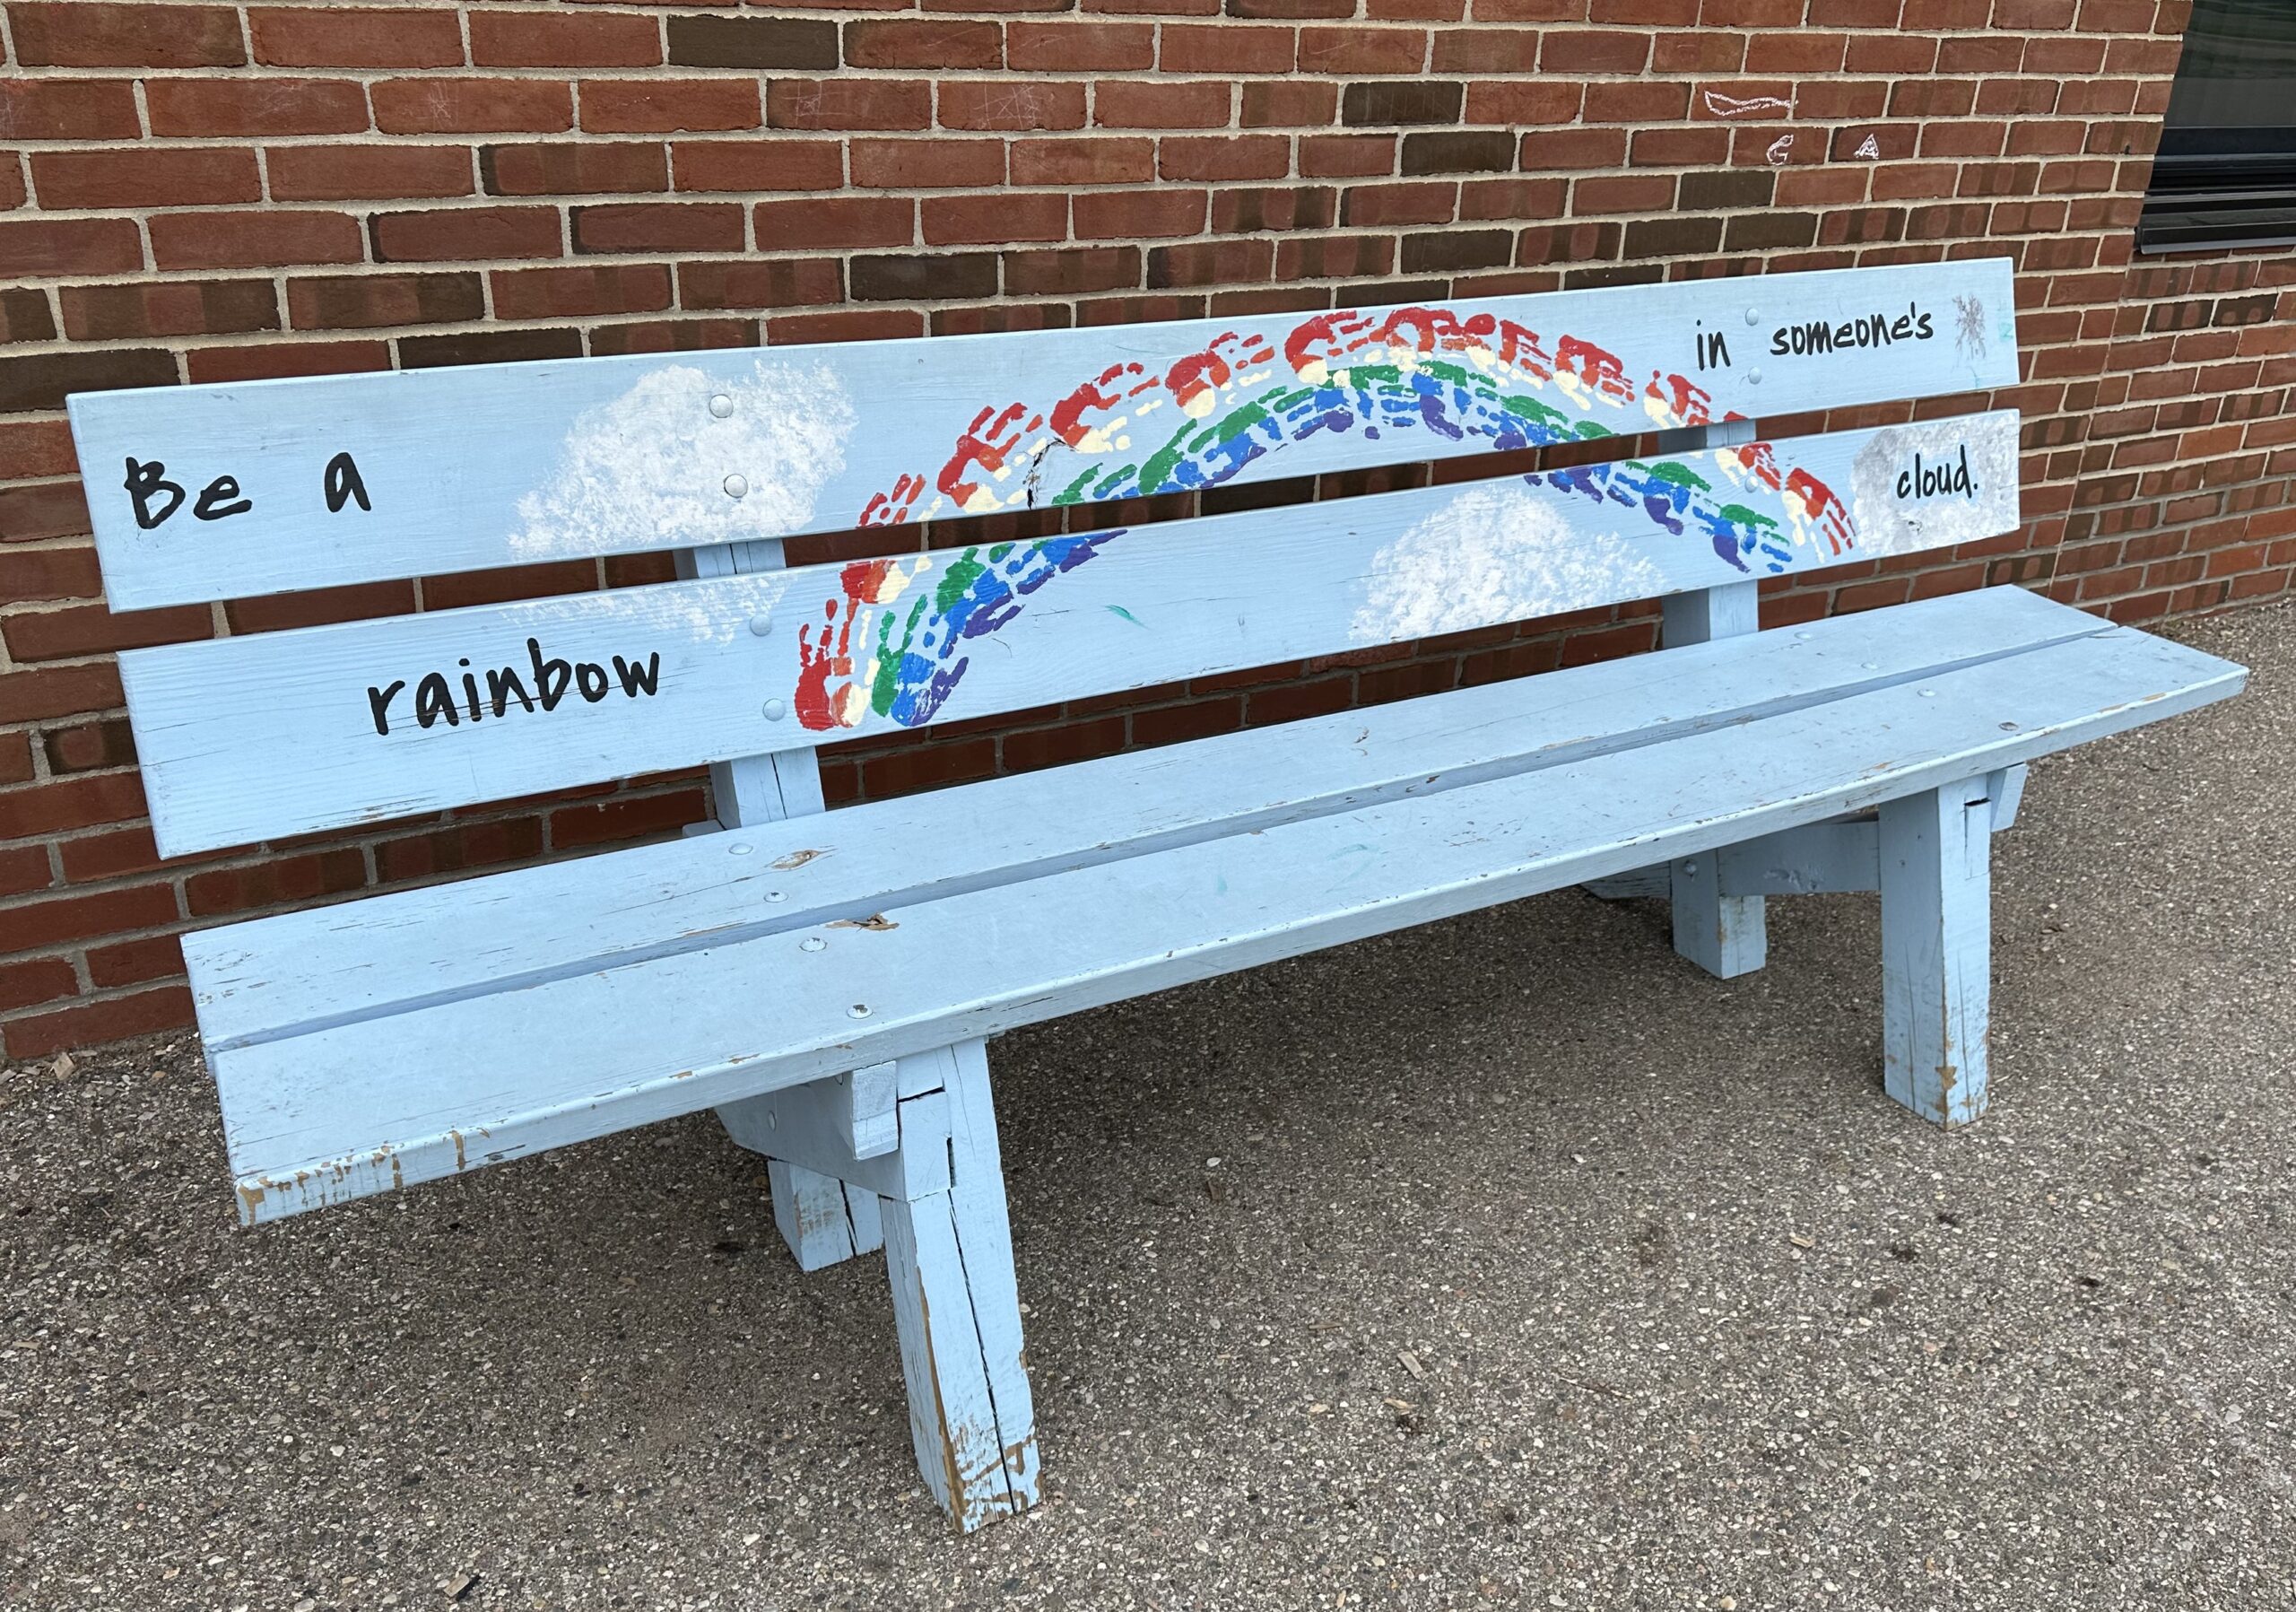 This Tonda Elementary School Buddy Bench is decorated with a cool phrase and artwork